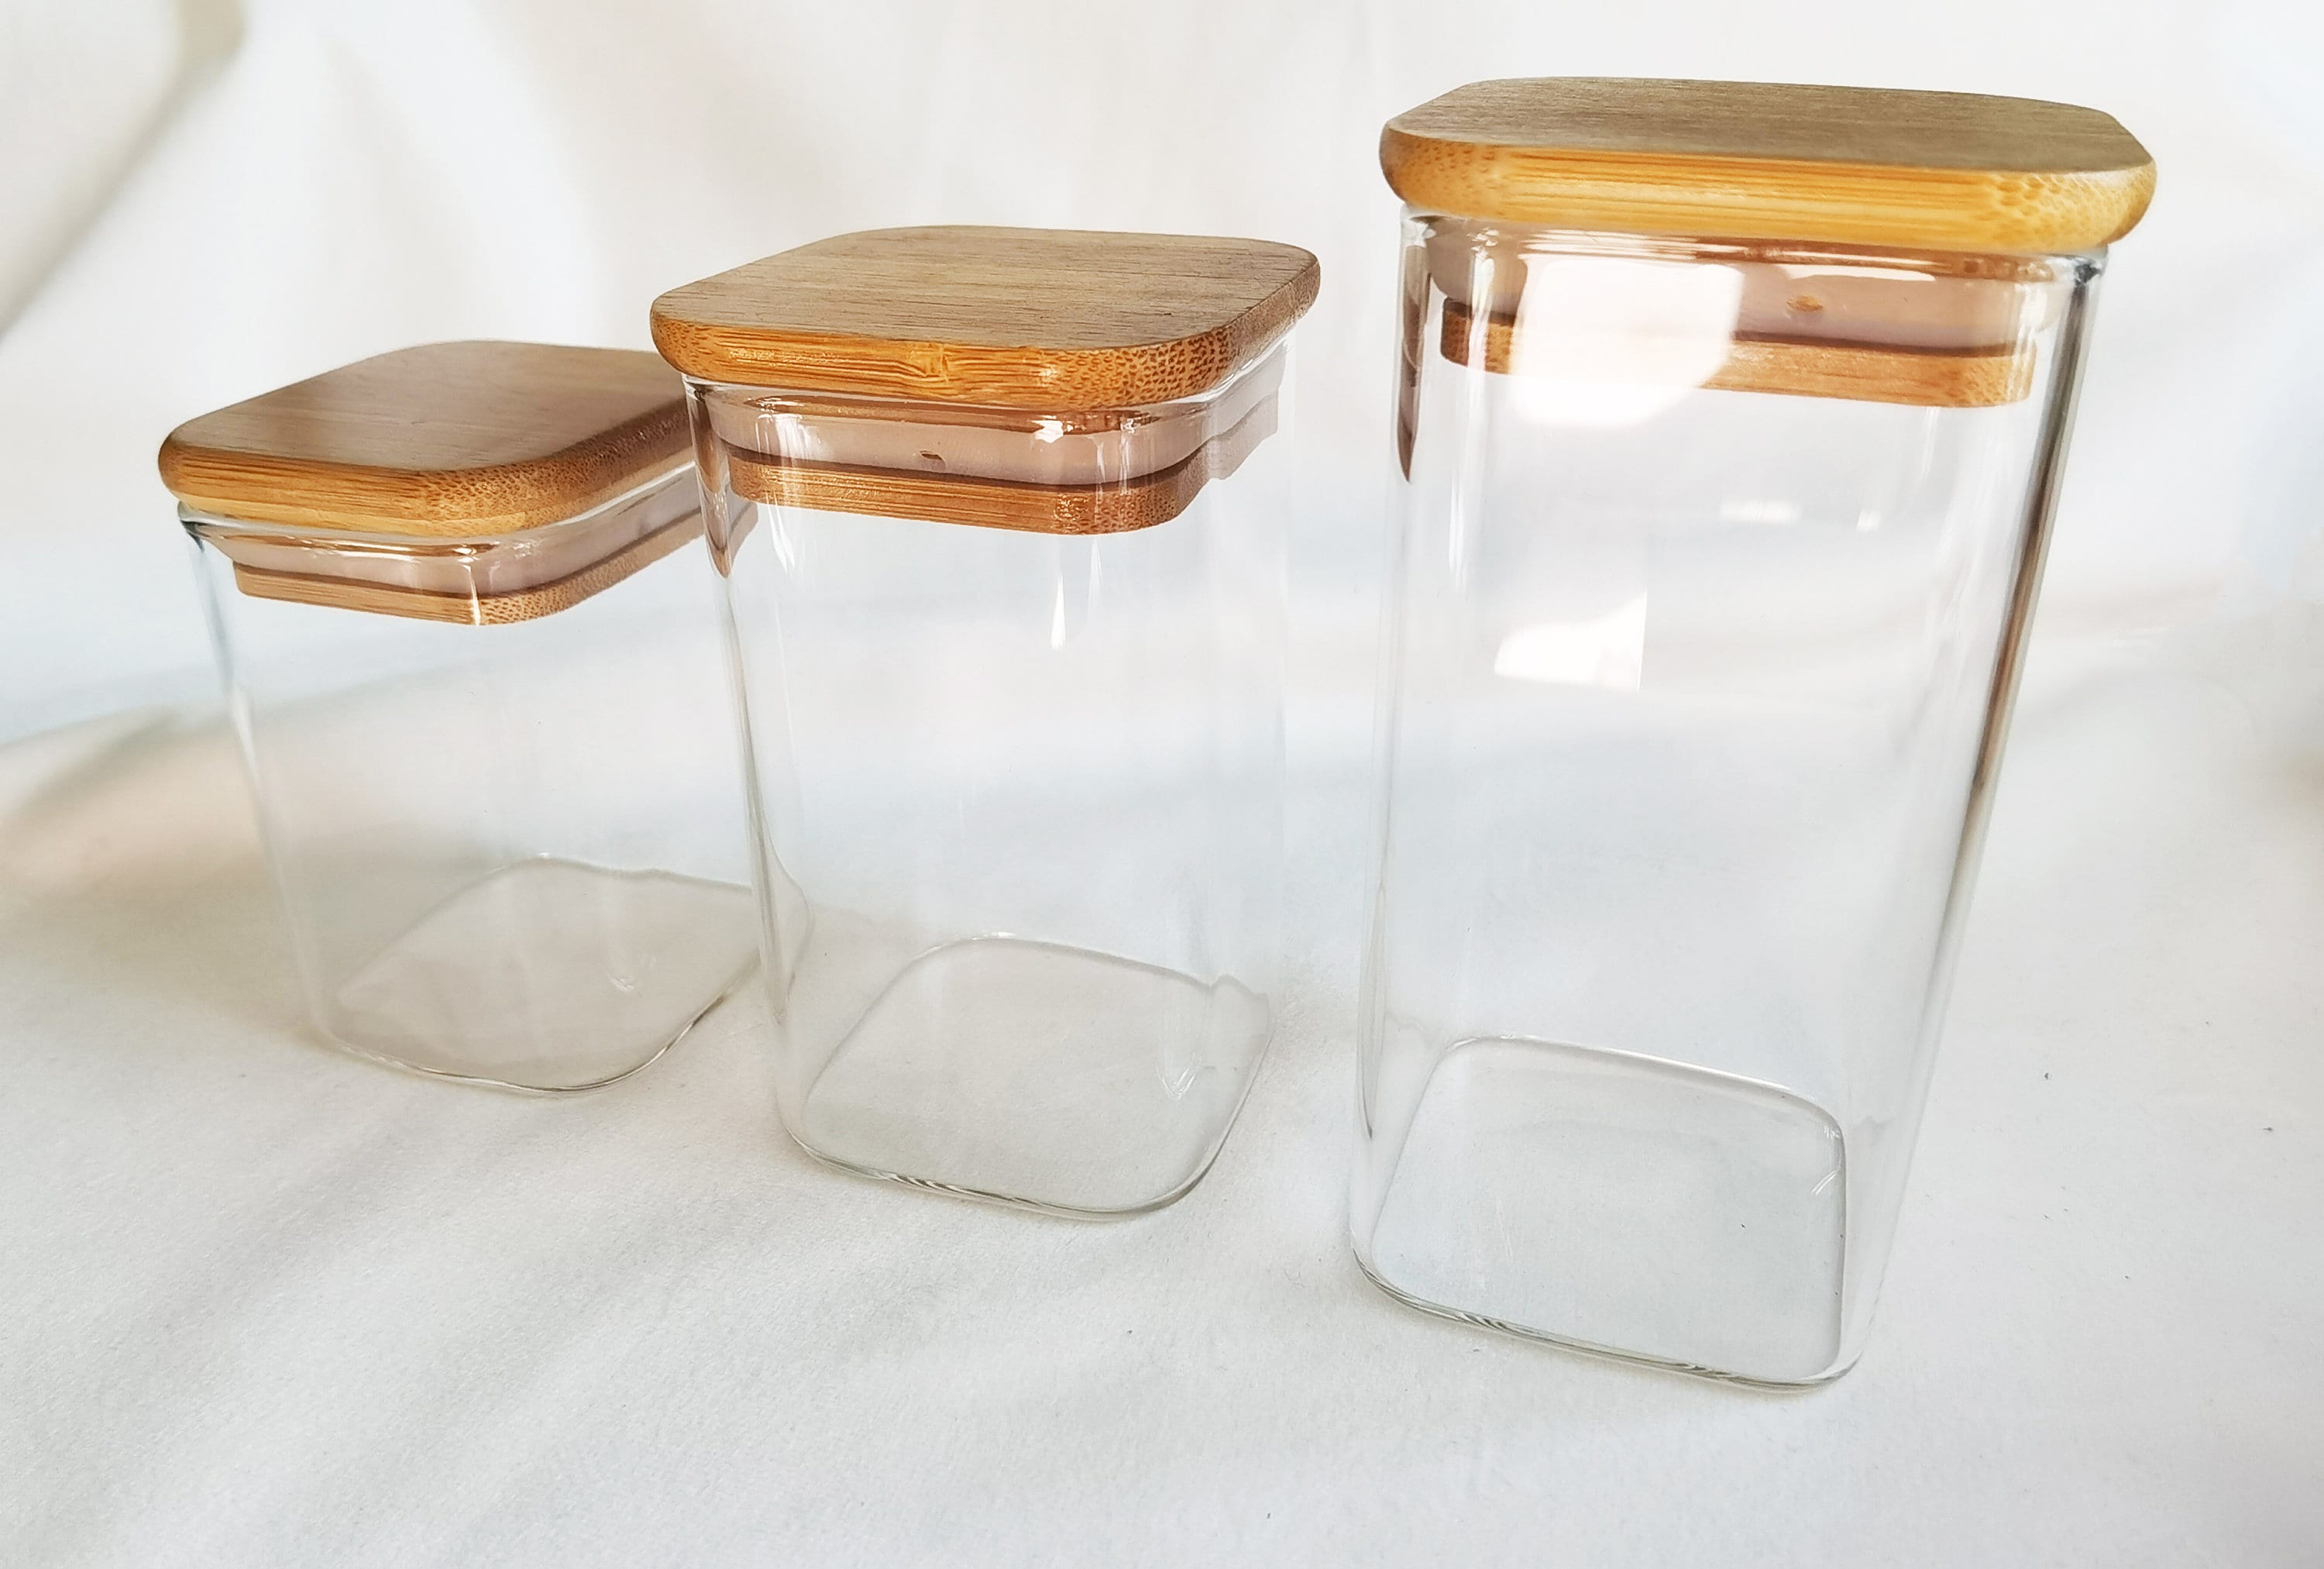 3pcs, High Borosilicate Glass Jars With Airtight Lids, Candy Jars, Food  Storage Containers With Bamboo Lids, Clear Jars, For Tea, Coffee, Spice,  Cand